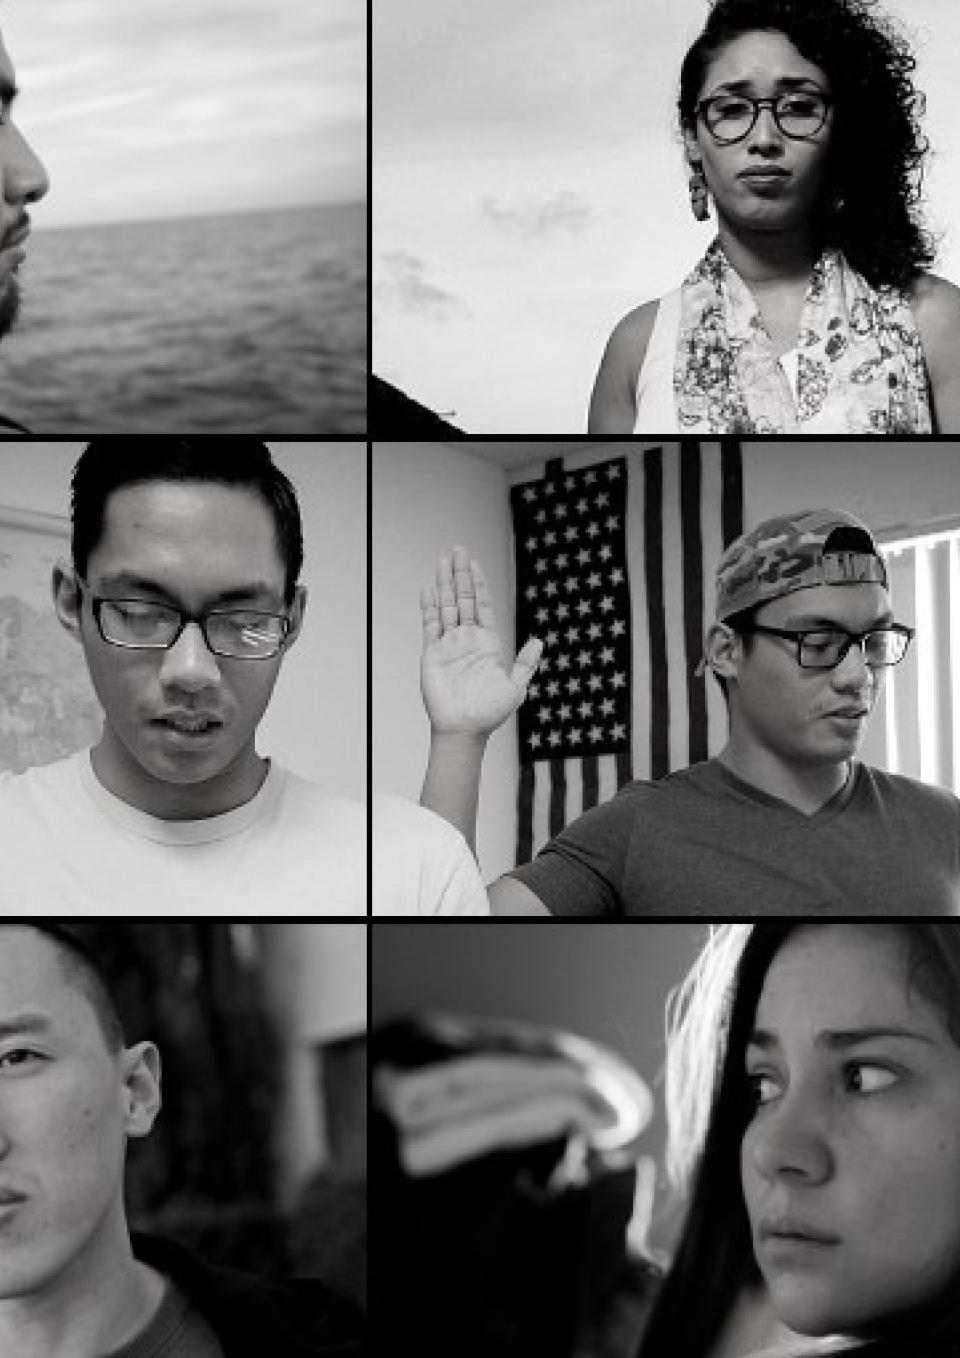 A row of six black and white portraits of immigrants to the United States taken from the film. They are serious and thoughtful. A U.S. flag hangs on the wall behind two of the people.